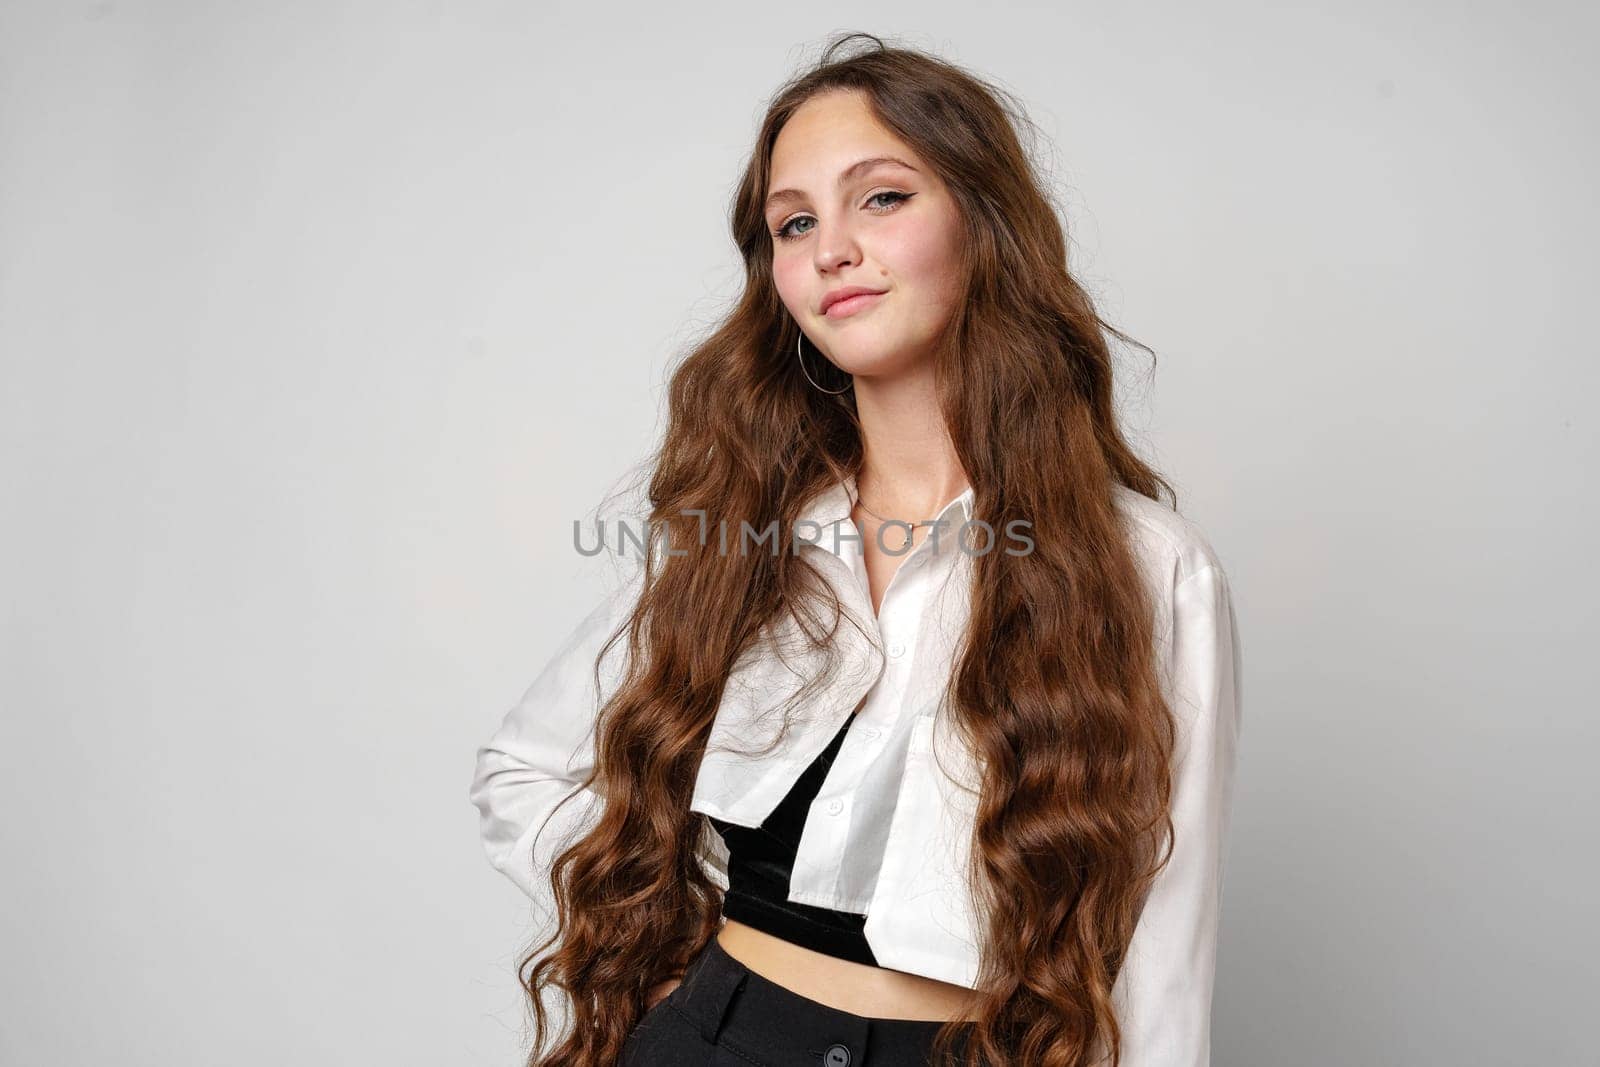 Confident Young Woman With Long Wavy Hair Posing in Casual Attire Against a Gray Backdrop by Fabrikasimf